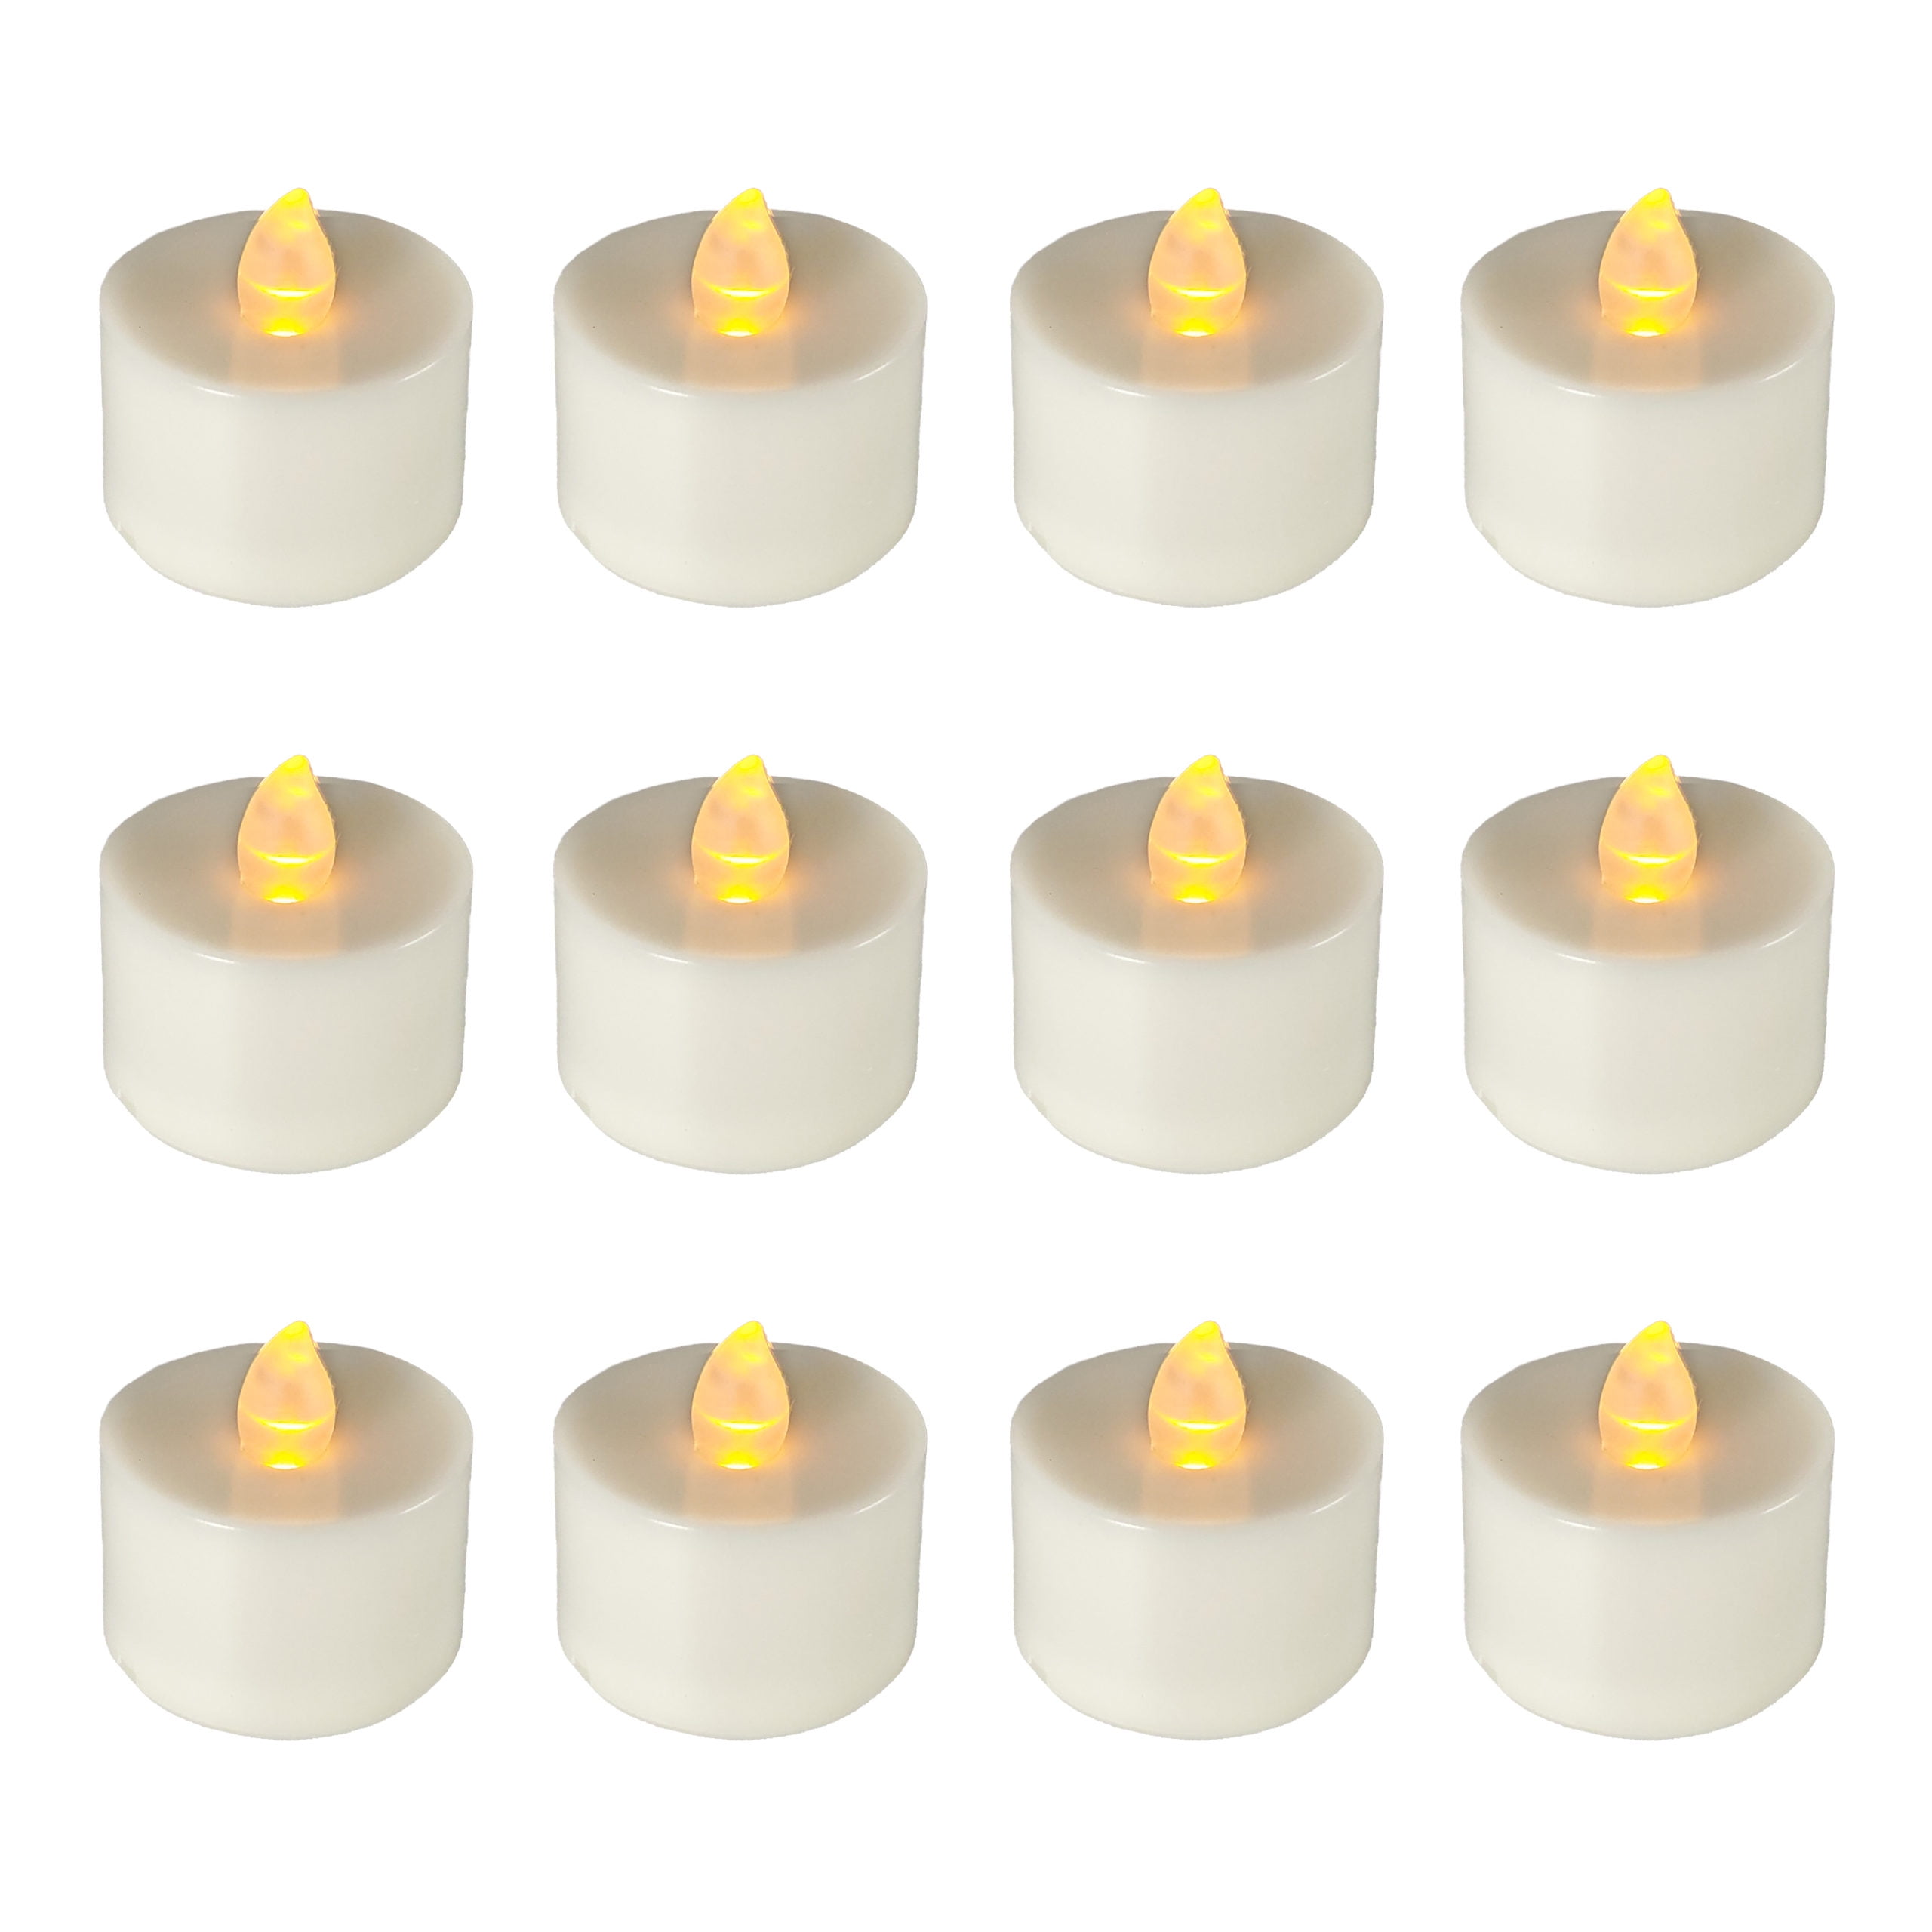 Set of 12 LED Flame-less Realistic Flickering Effect Tea Light Candles 